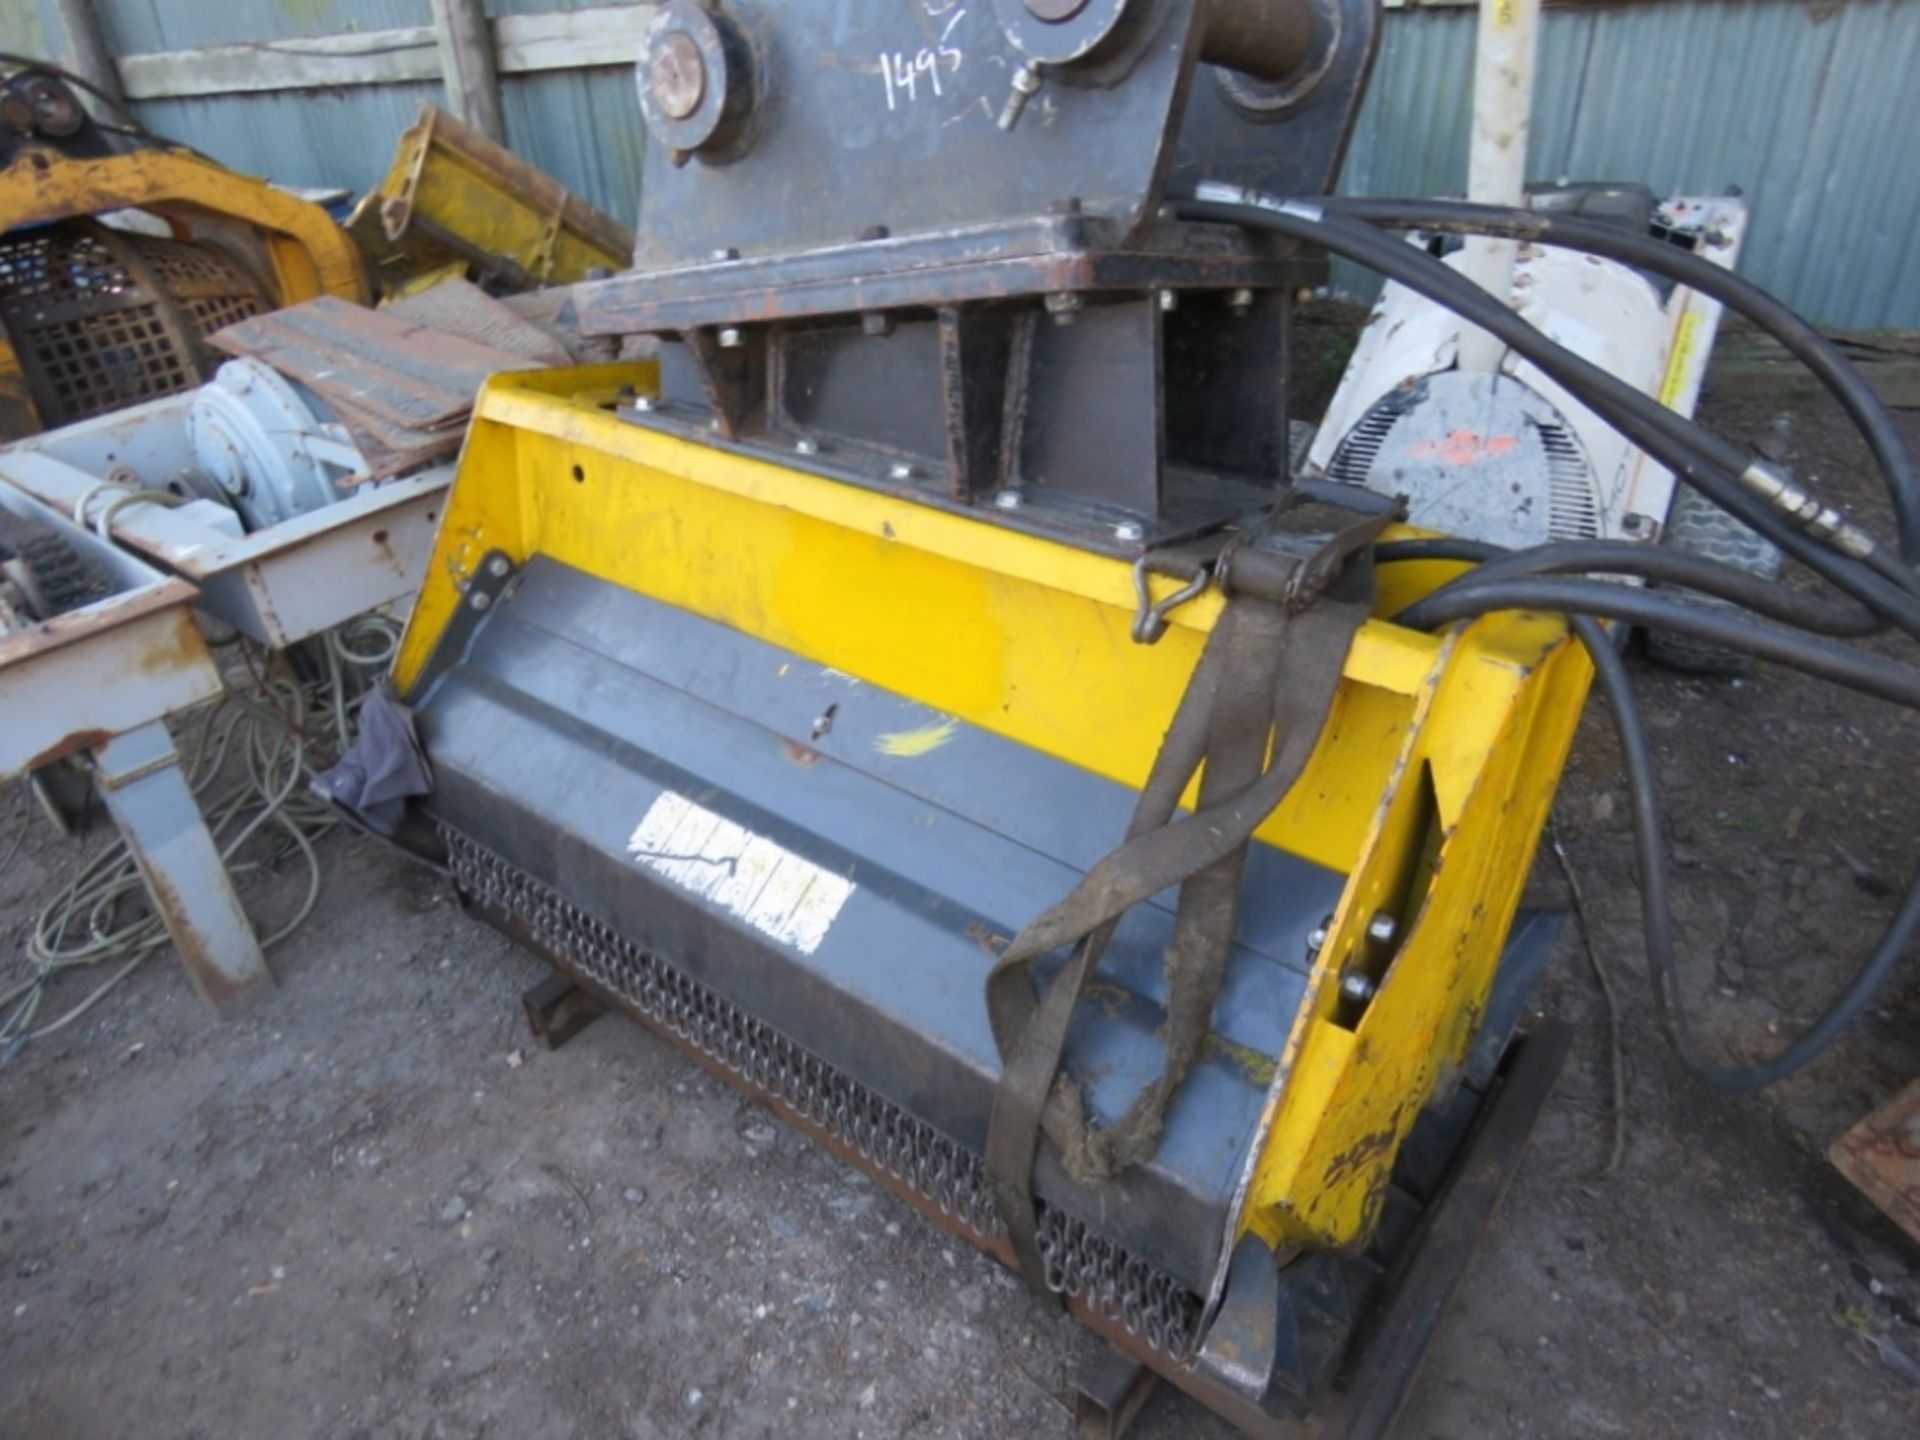 FEMAC EXCAVATOR MOUNTED HEAVY DUTY FLAIL HEAD ON 80MM PINS. UNTESTED, CONDITION UNKNOWN.